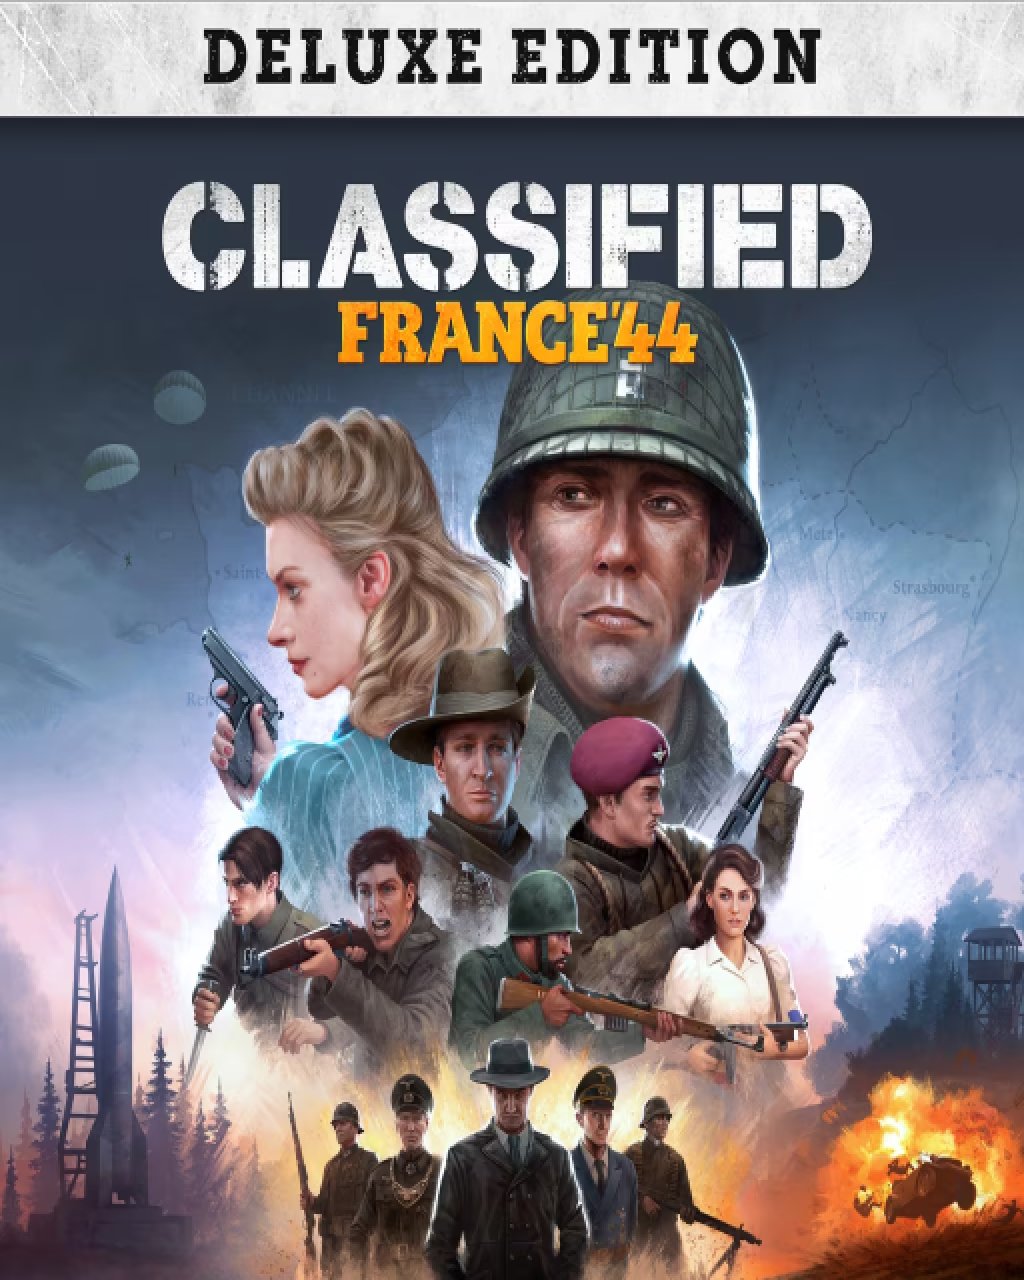 Classified France '44 Deluxe Edition